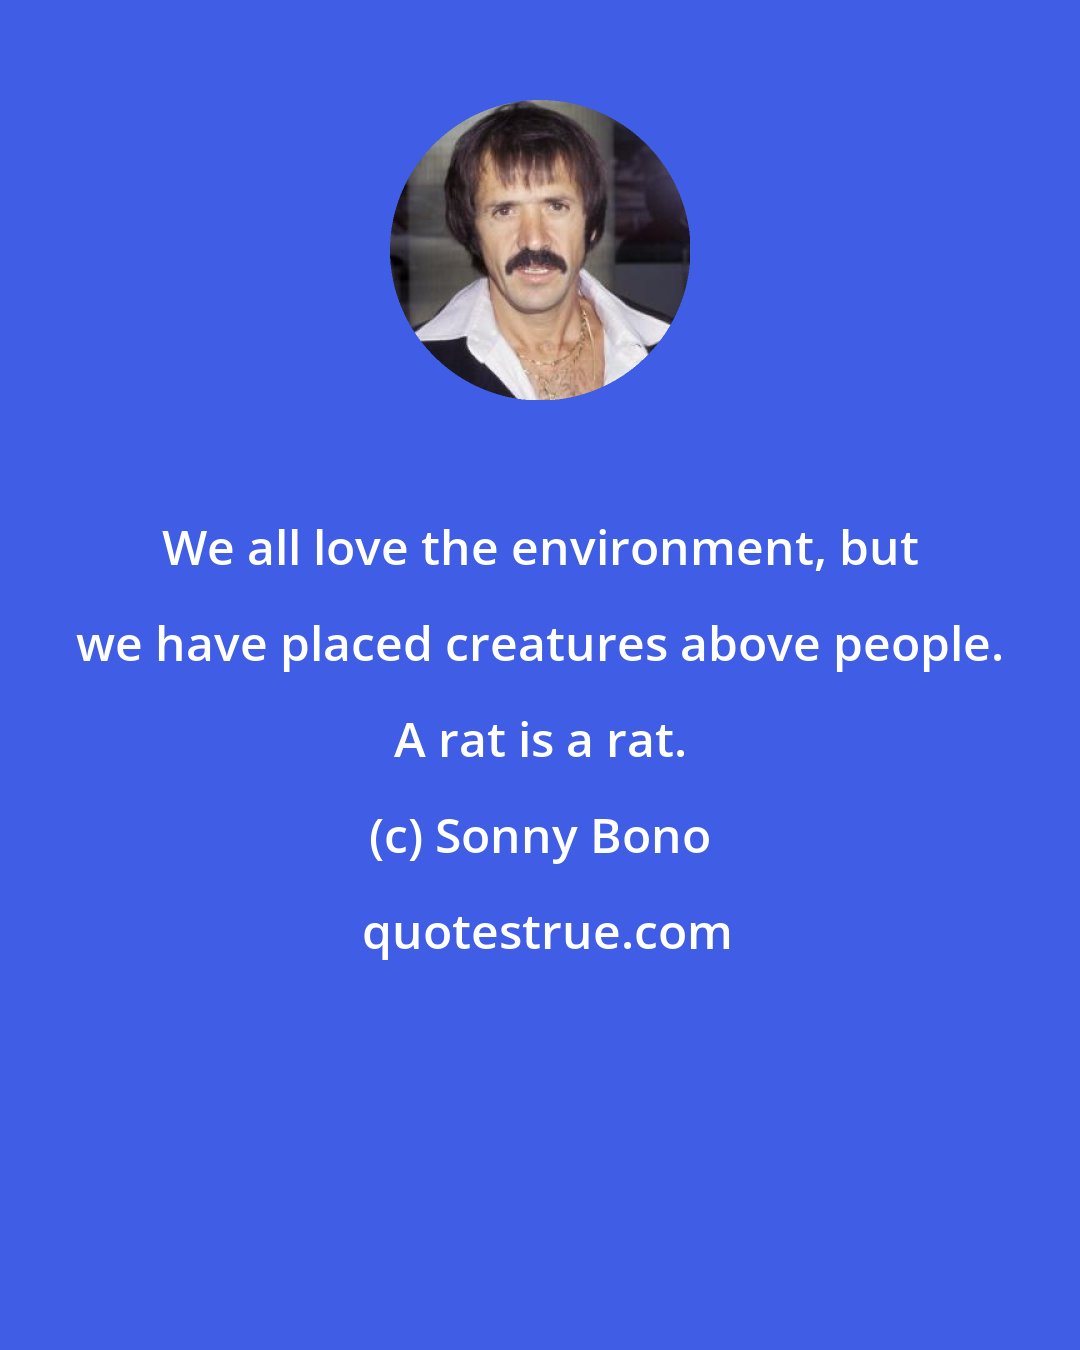 Sonny Bono: We all love the environment, but we have placed creatures above people. A rat is a rat.